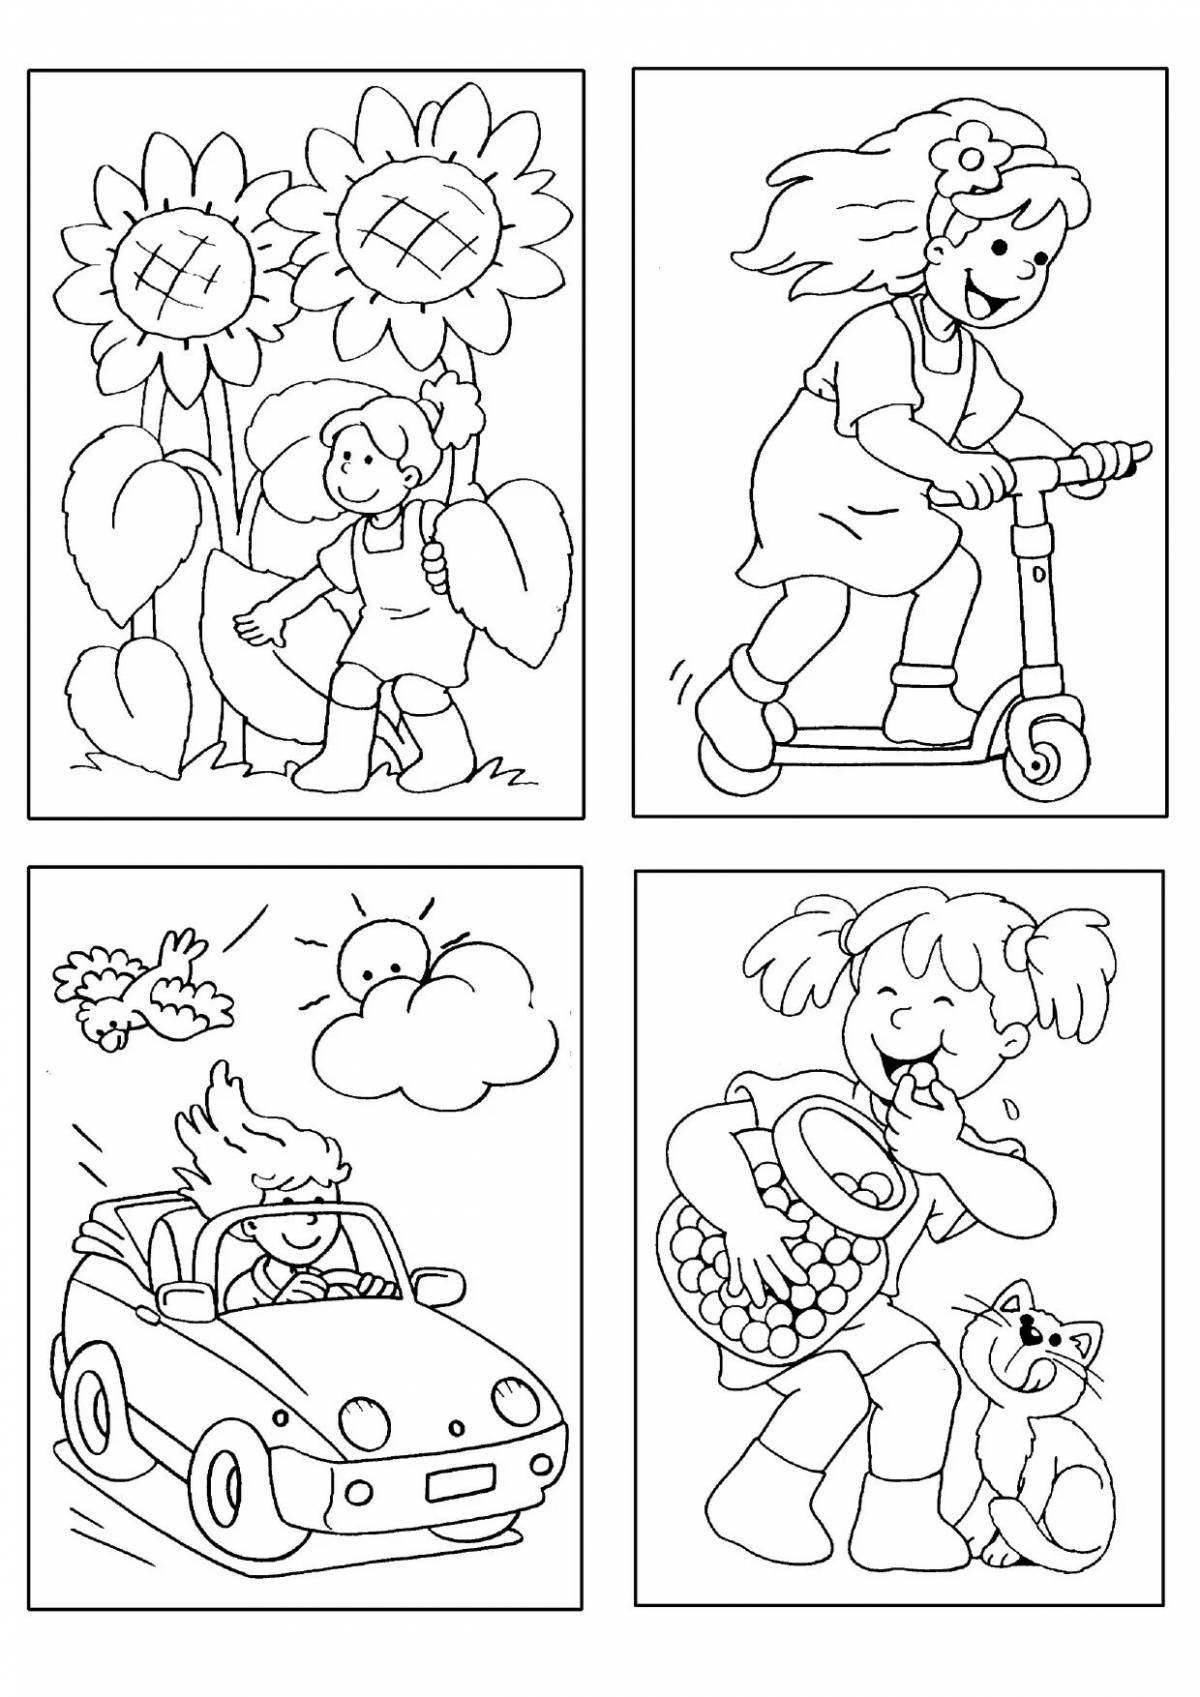 Coloring book 2 on 1 sheet for children